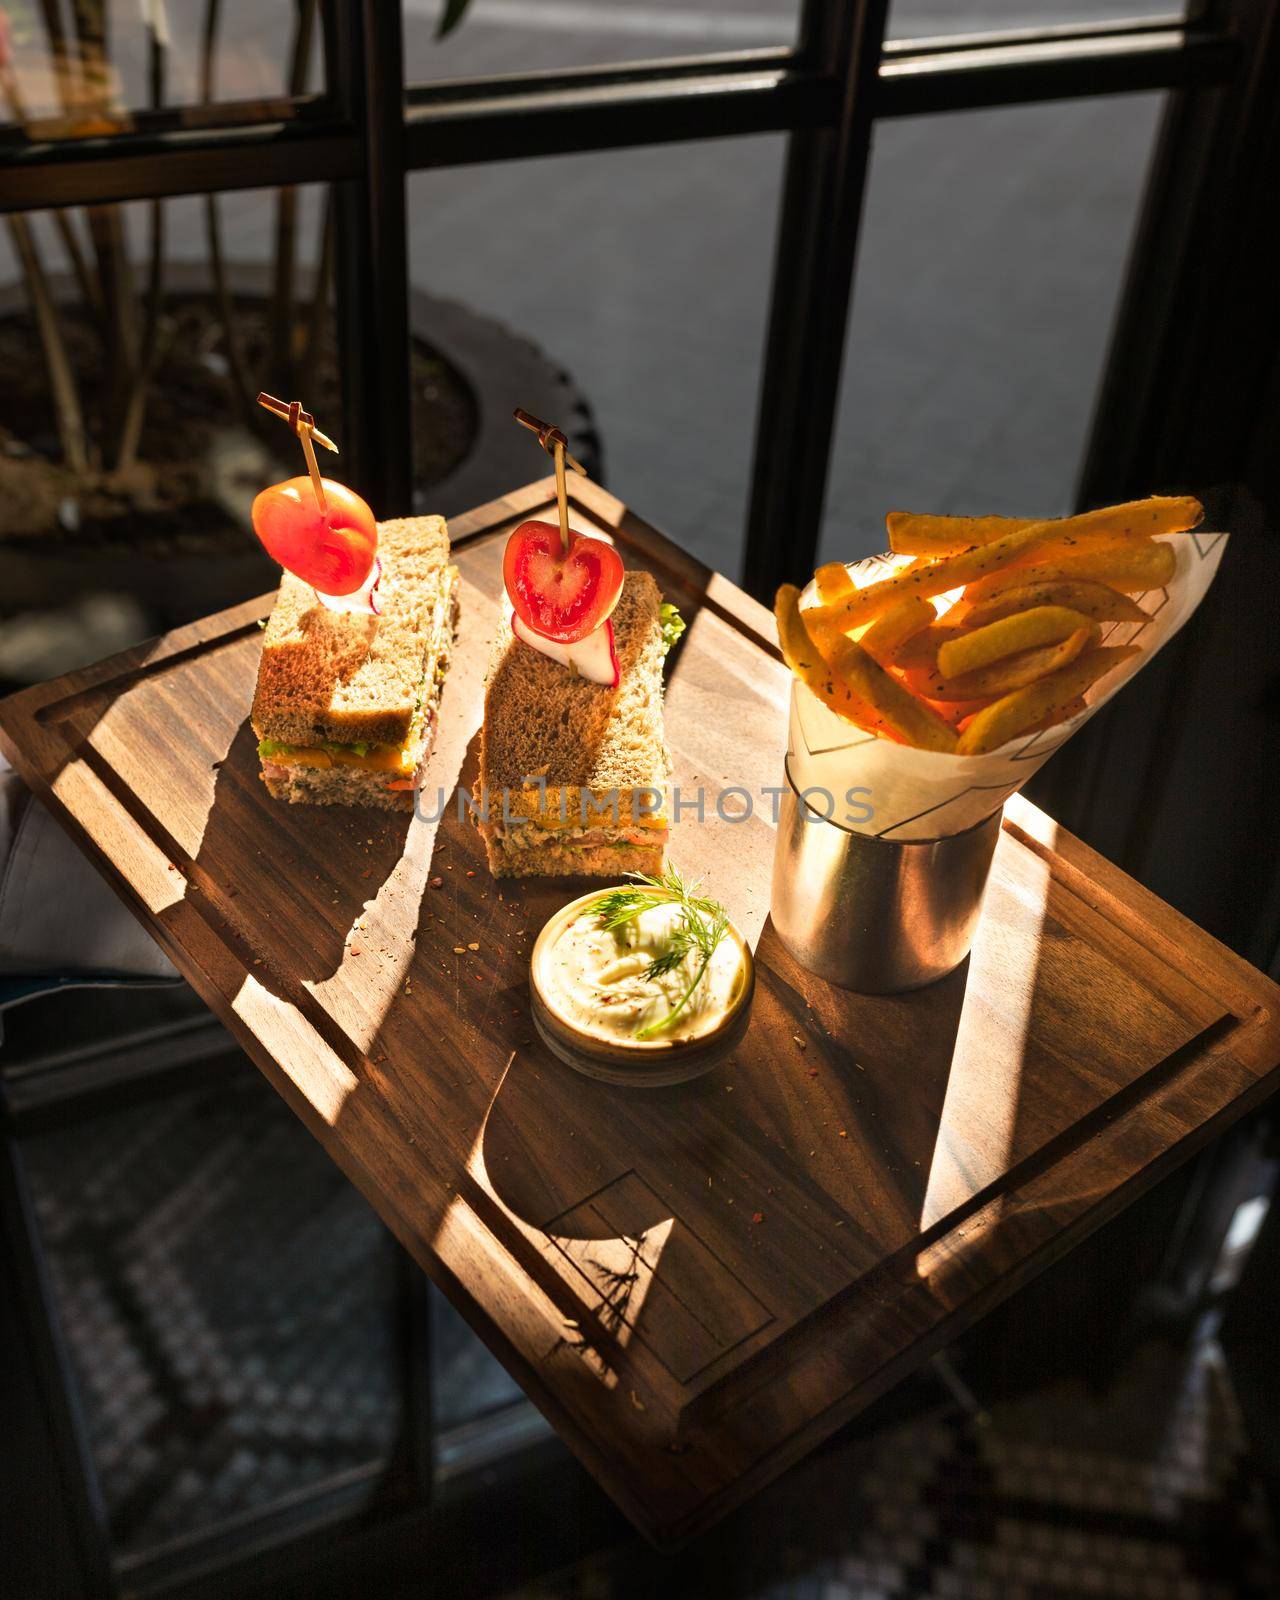 French fries with sandwich, sun shine on wooden plate